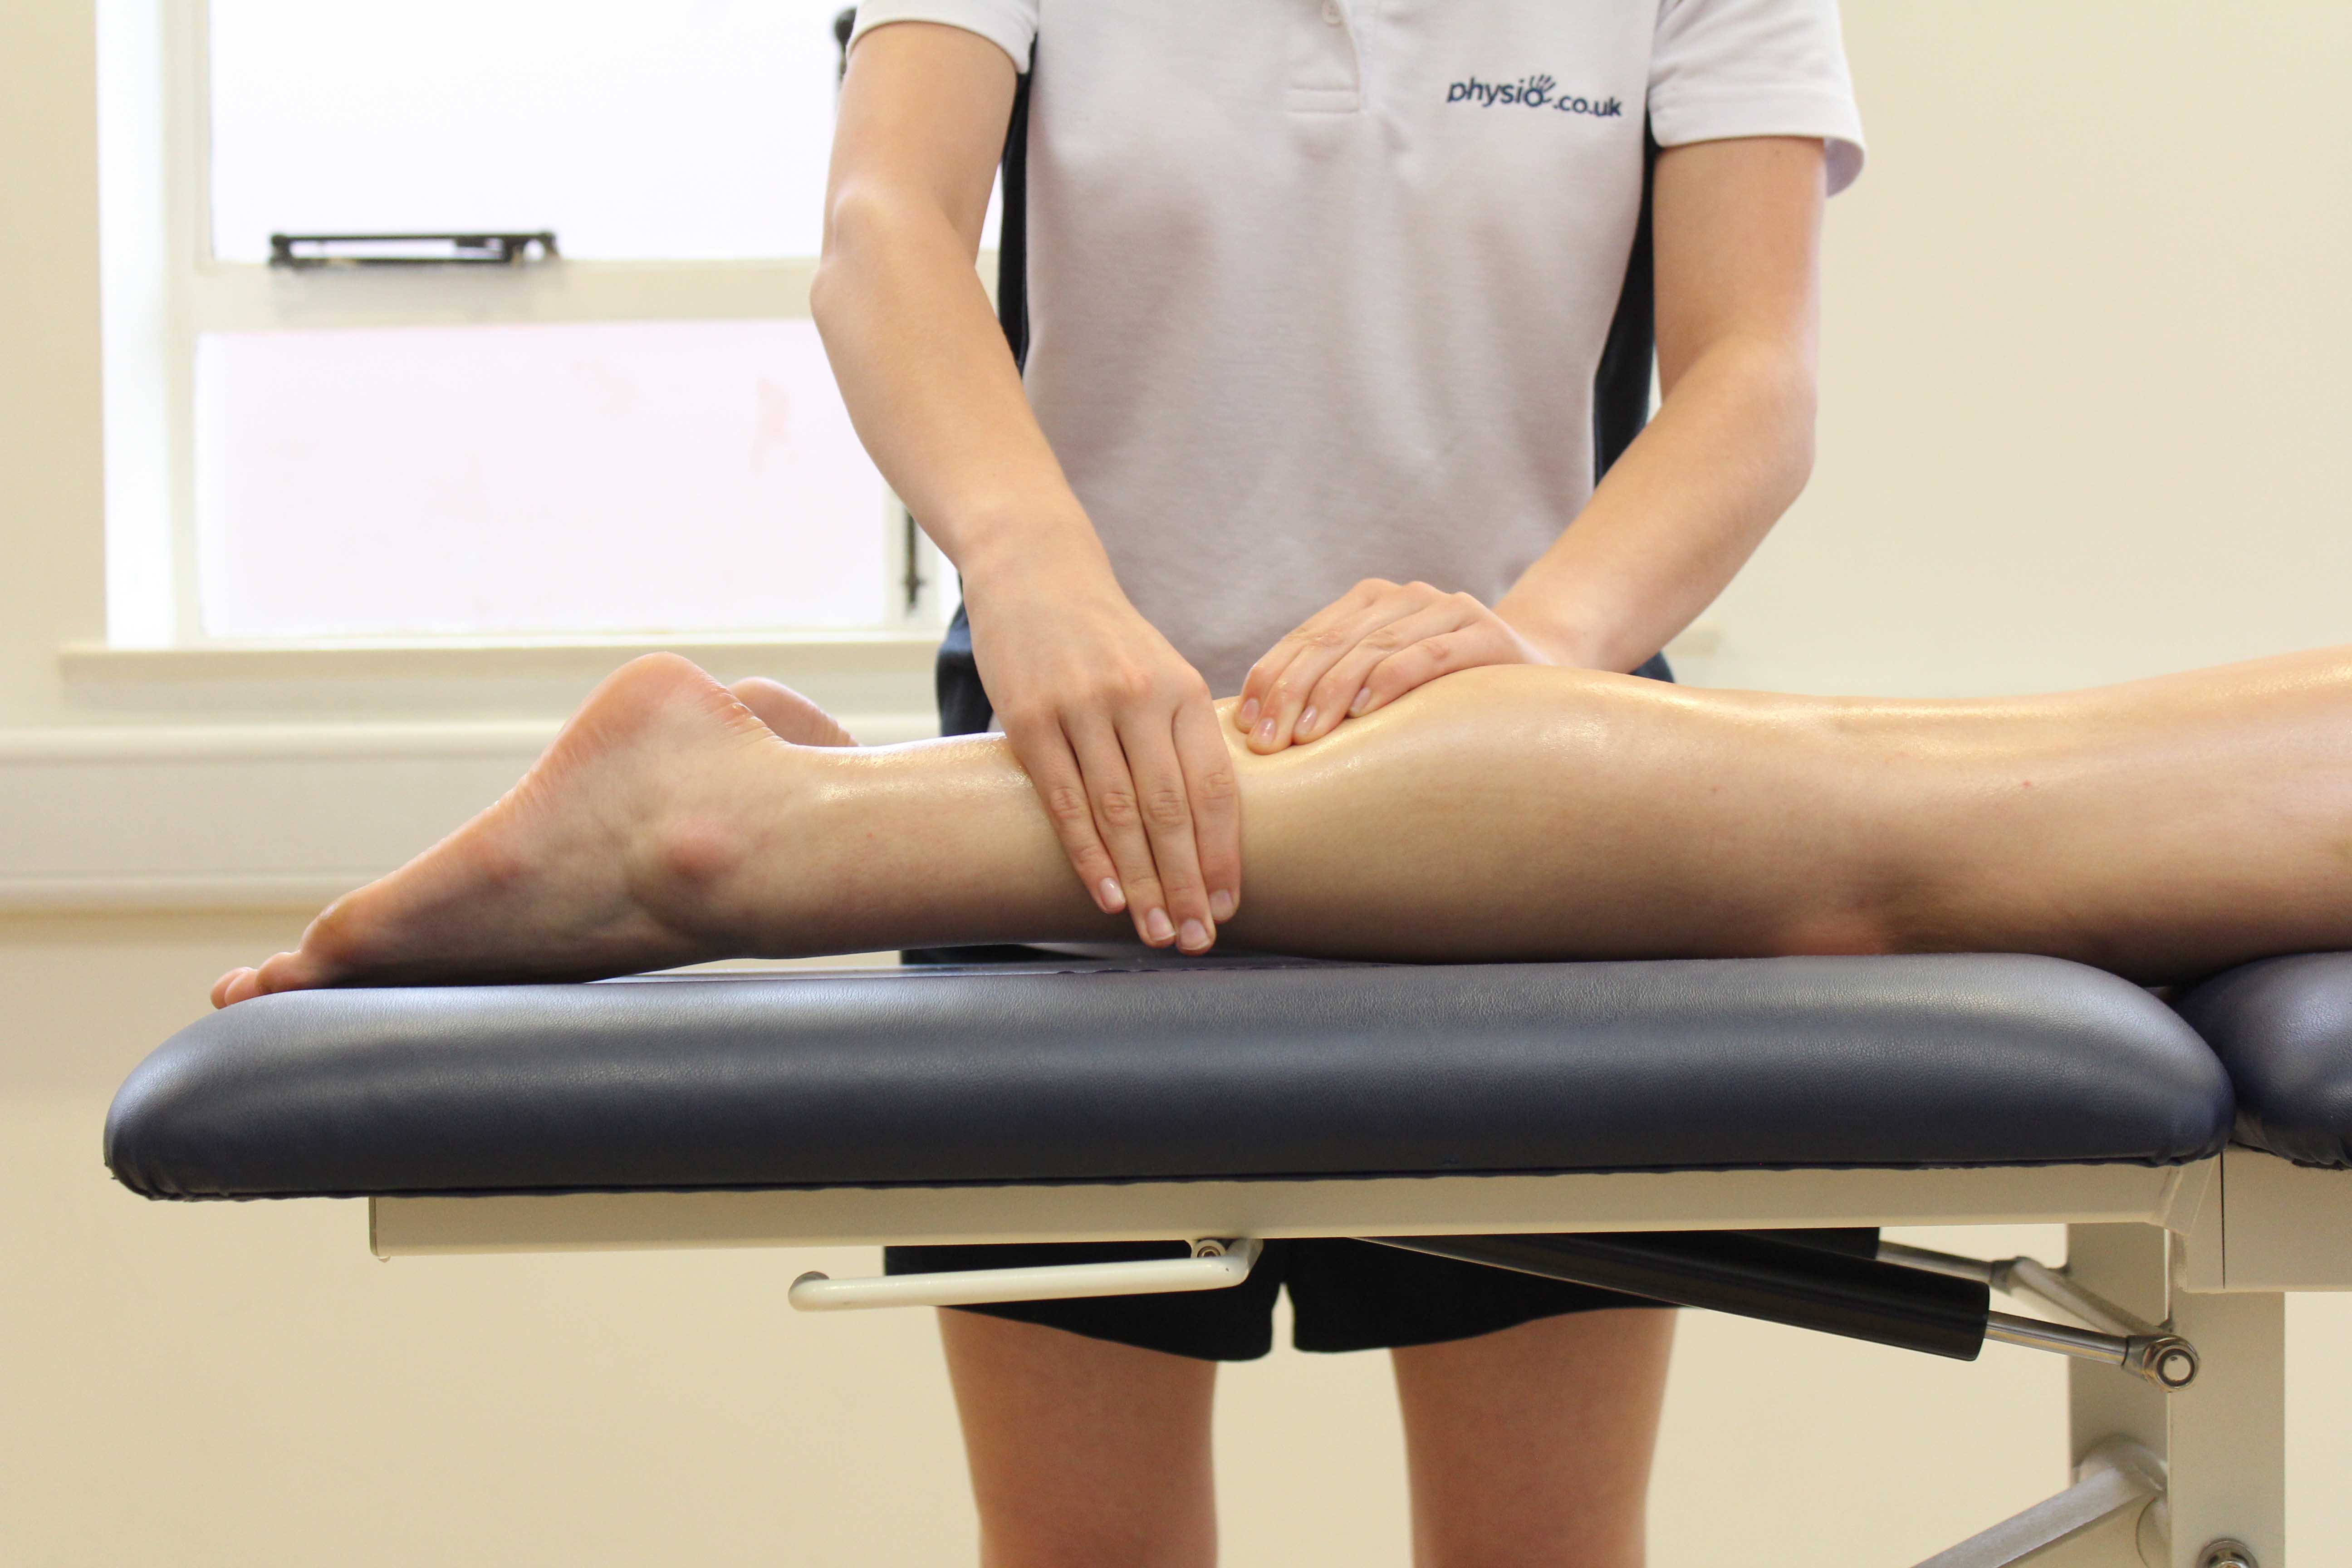 Rolling soft tissue massage of the gastroc nemius by a specilaist physiotherapist